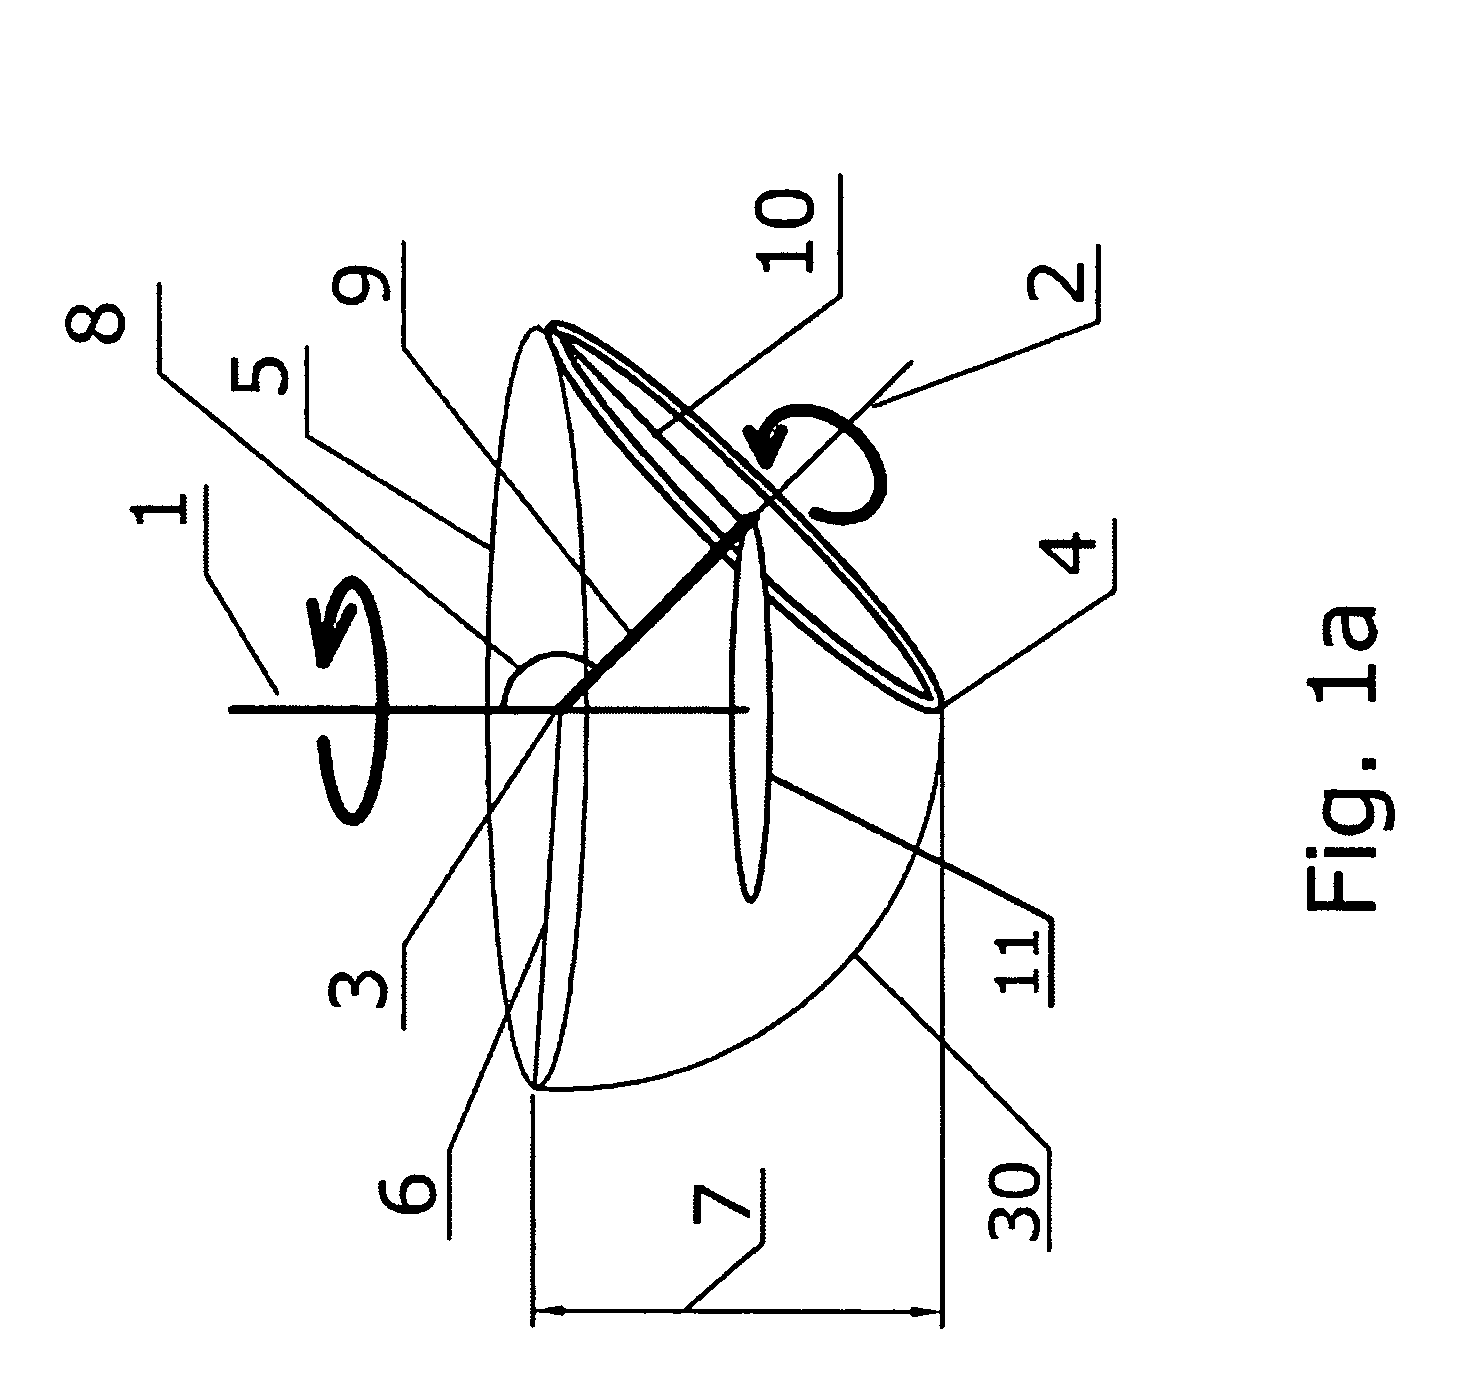 Device for shaping object with a profile of at least a partial sphere